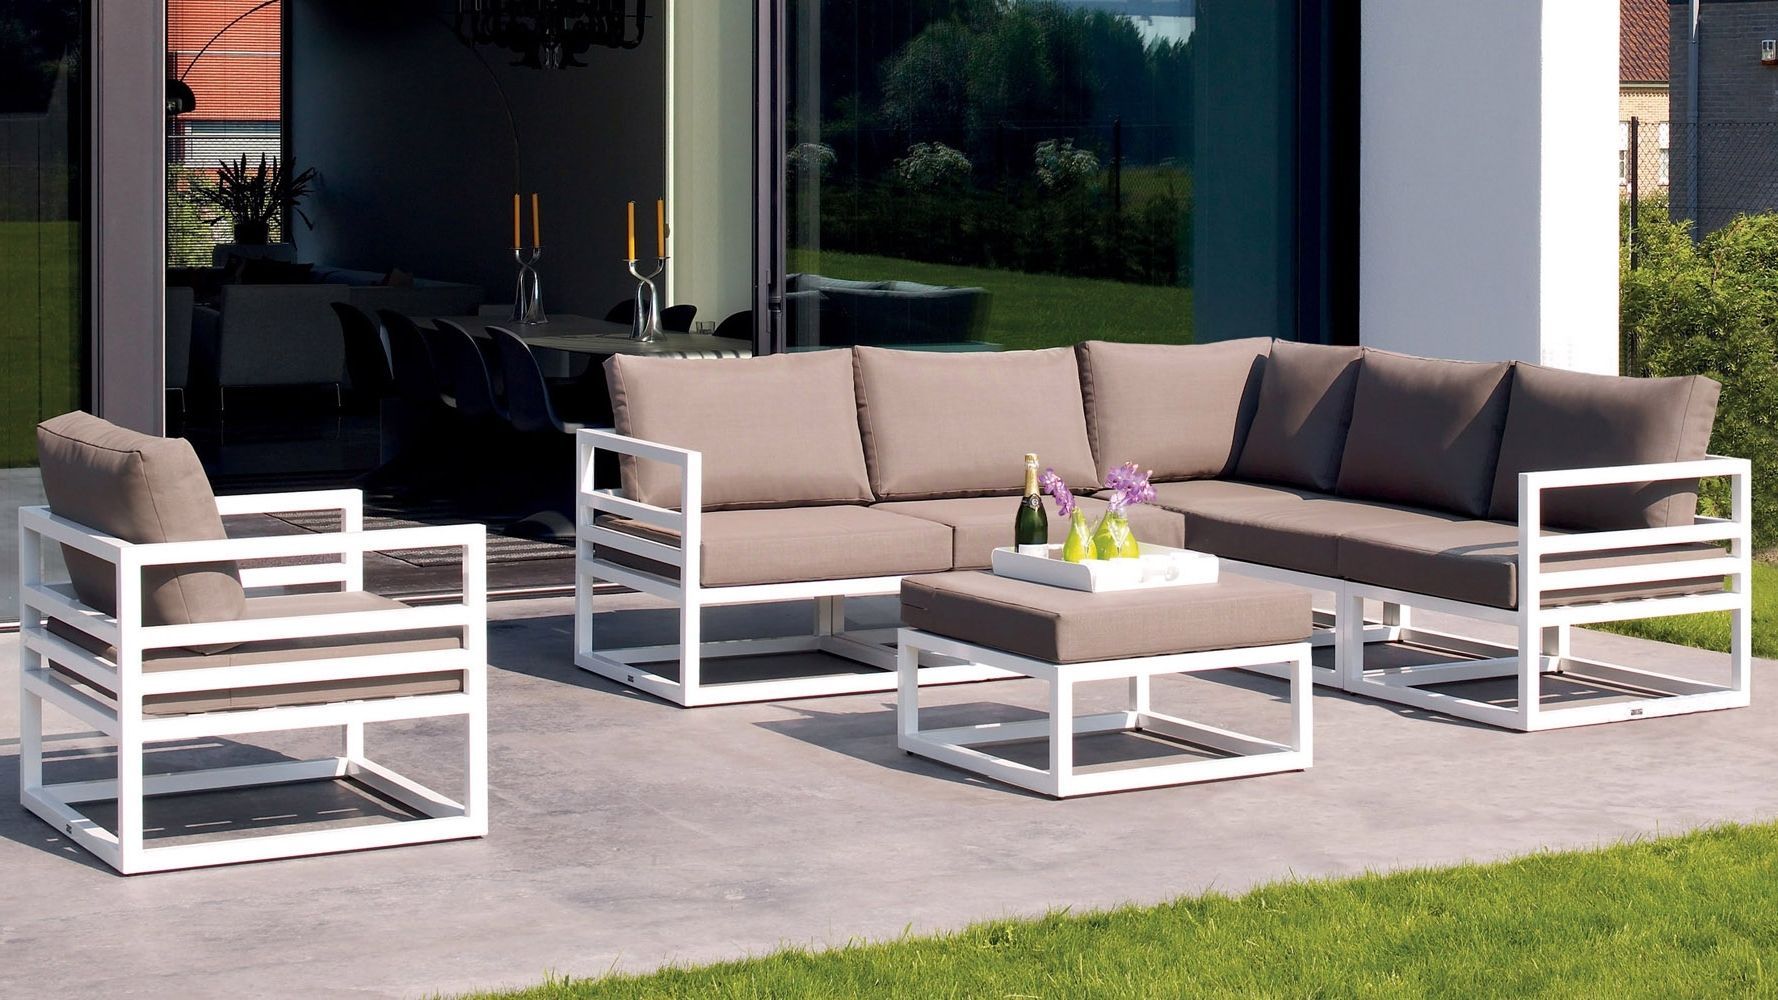 Outdoor Sofas And Chairs For Most Current White Aluminum Fabri Outdoor Lounge Set With Taupe Cushions (View 1 of 20)